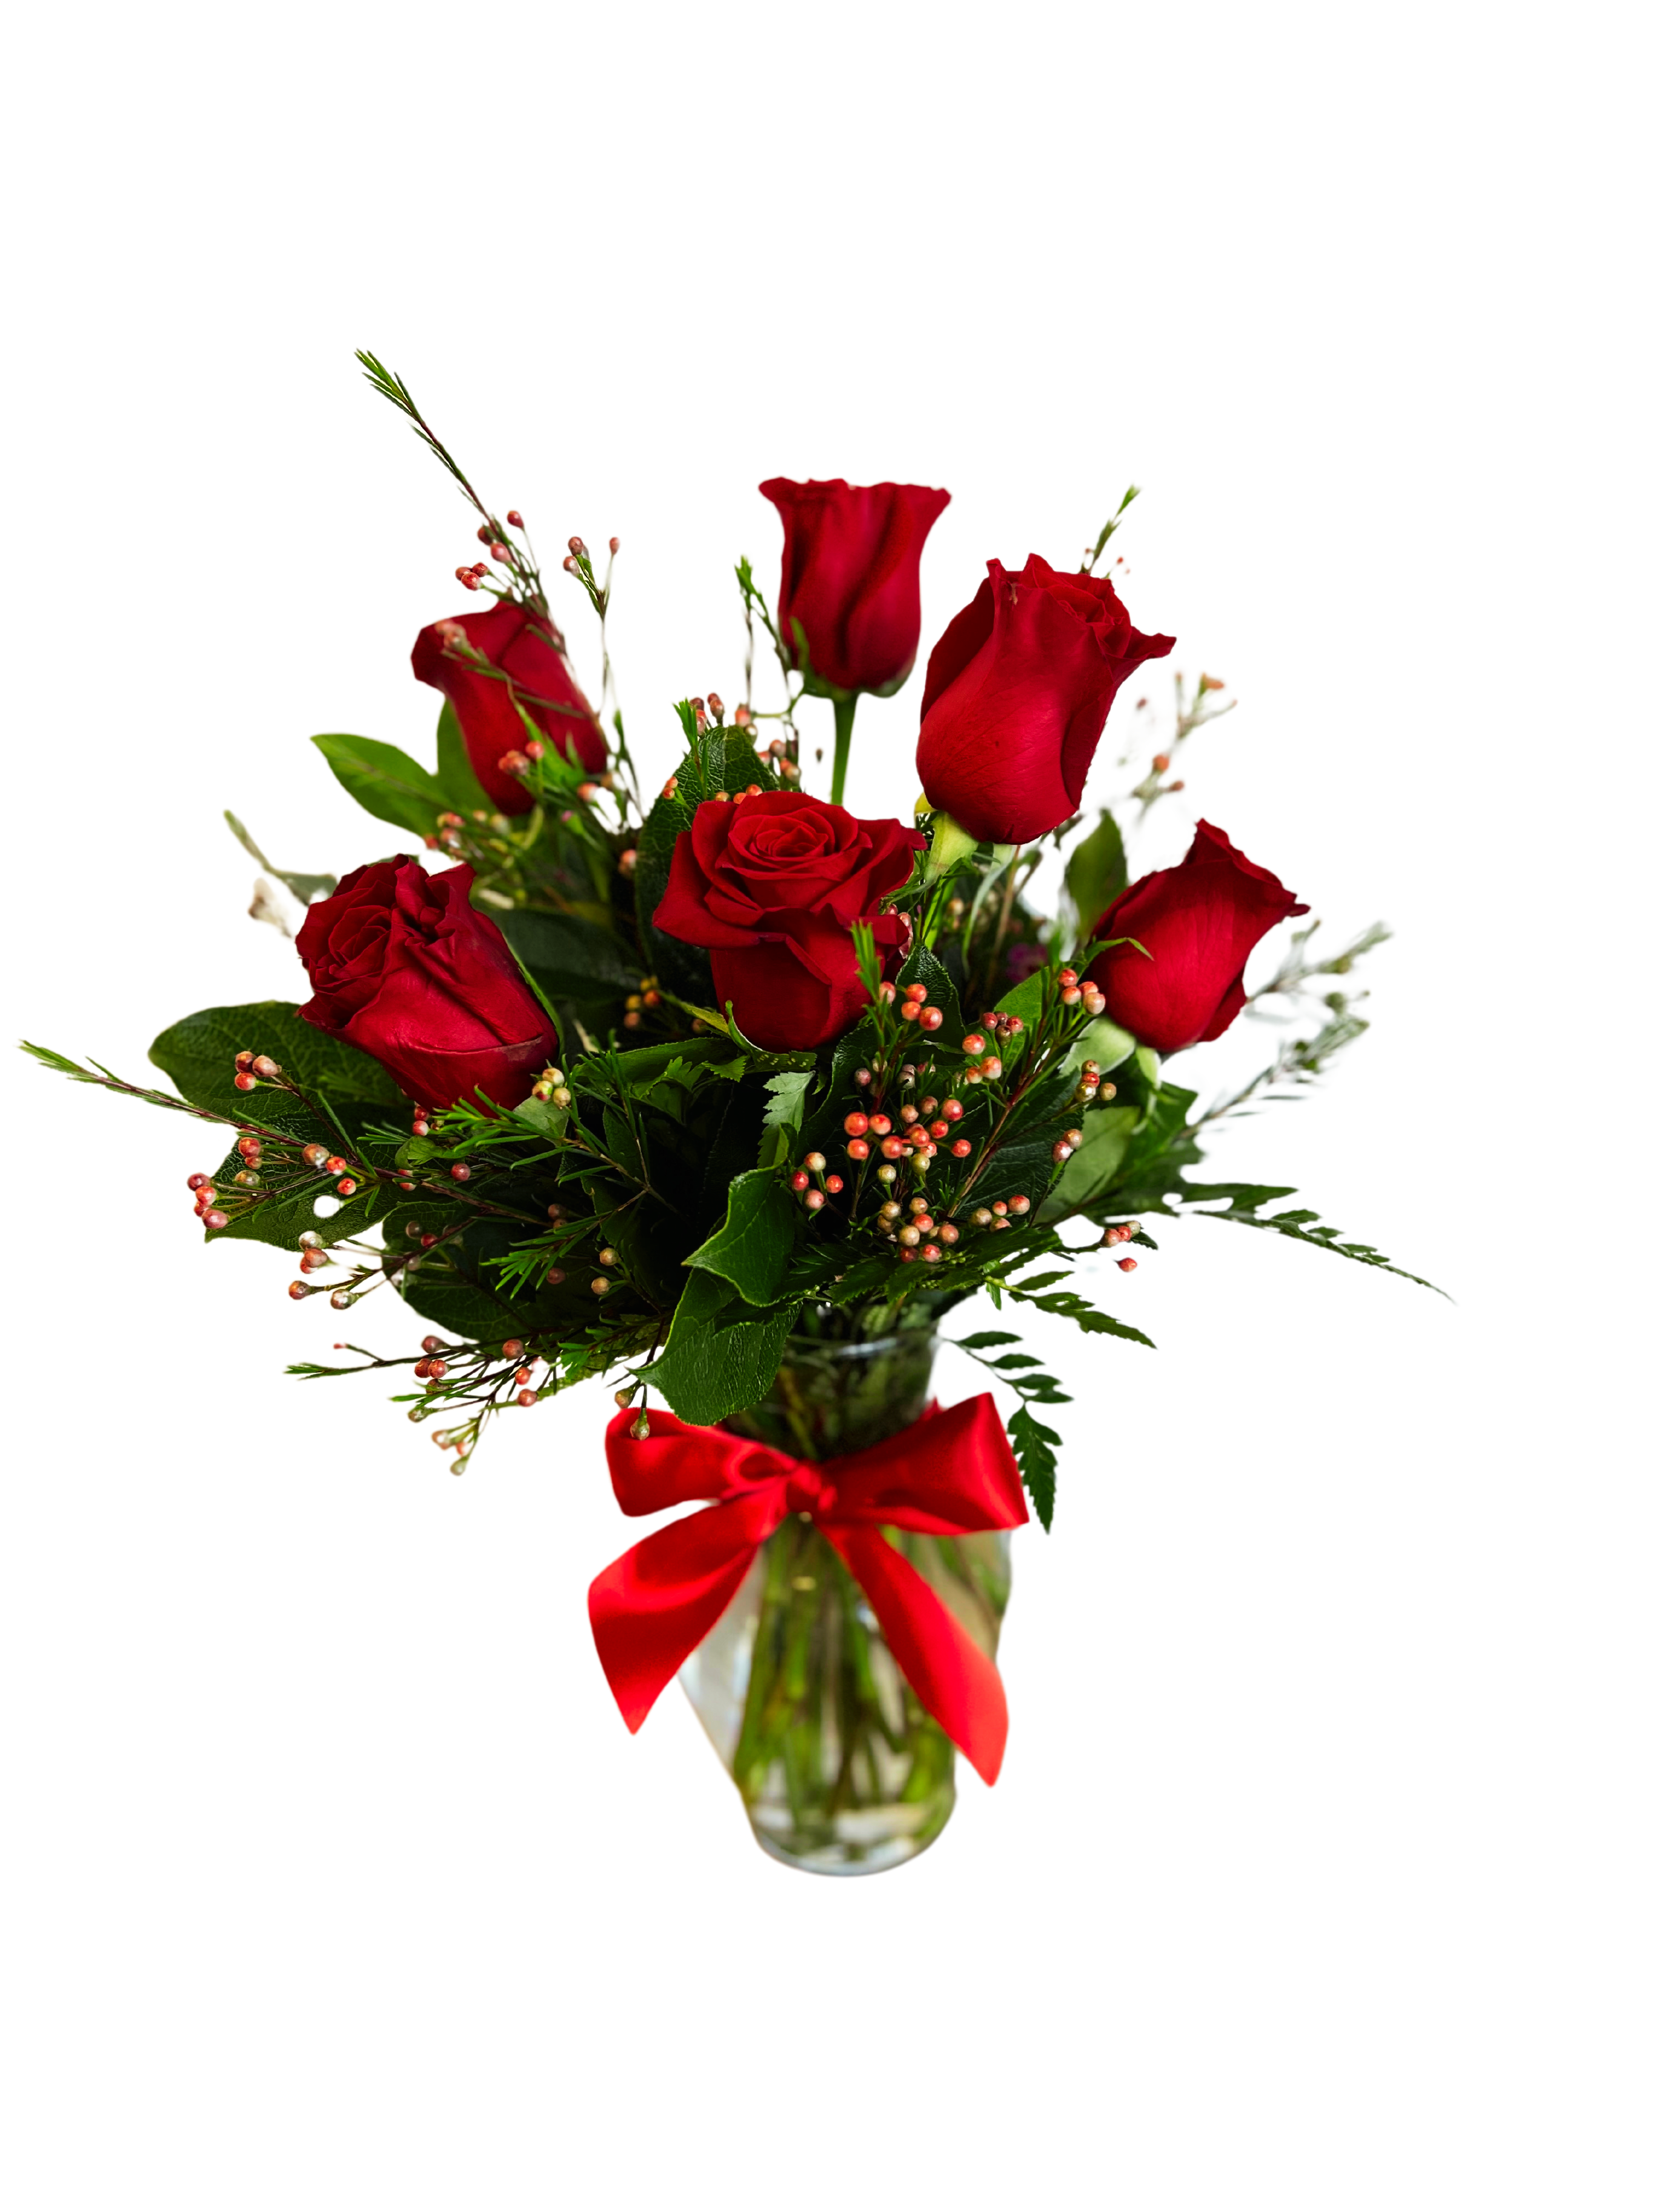 6 Red Roses - 6 Red Roses in a vase with beautiful greenery and filler